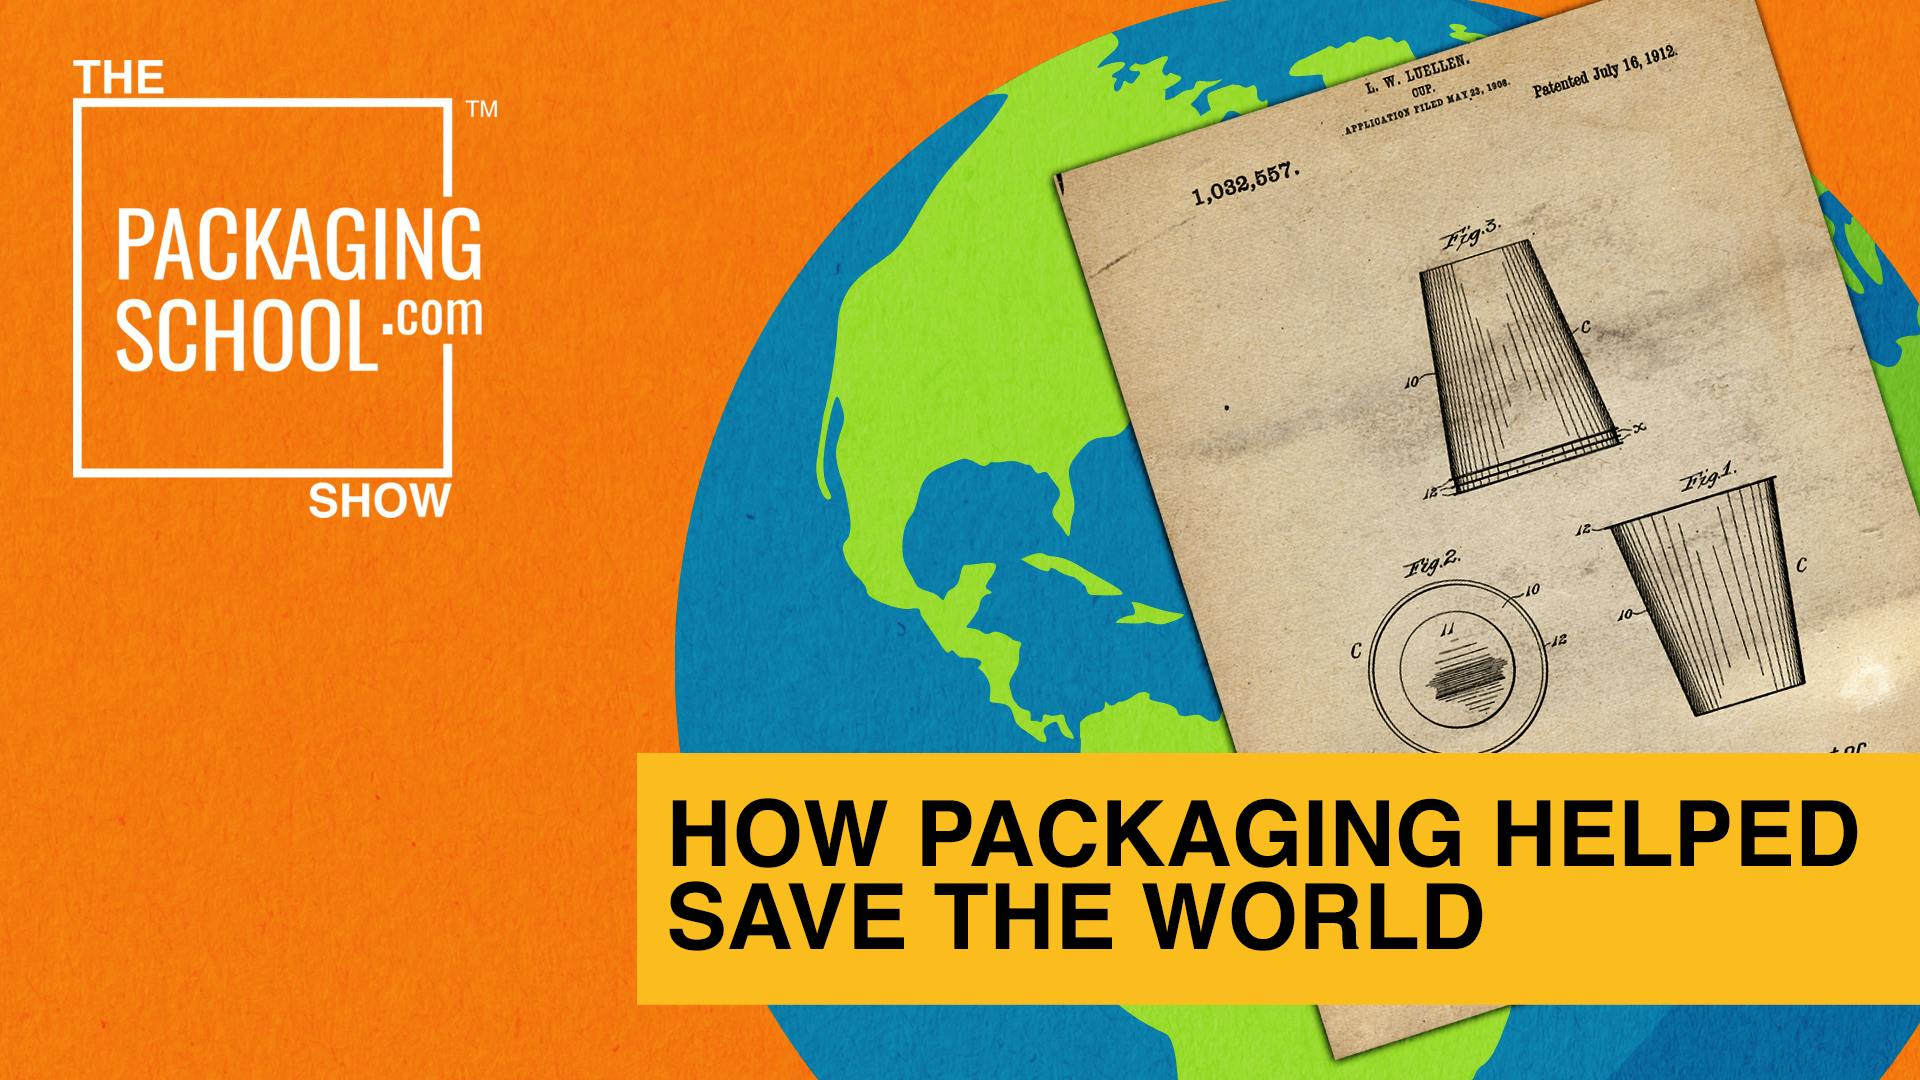 How Packaging Helped Save the World